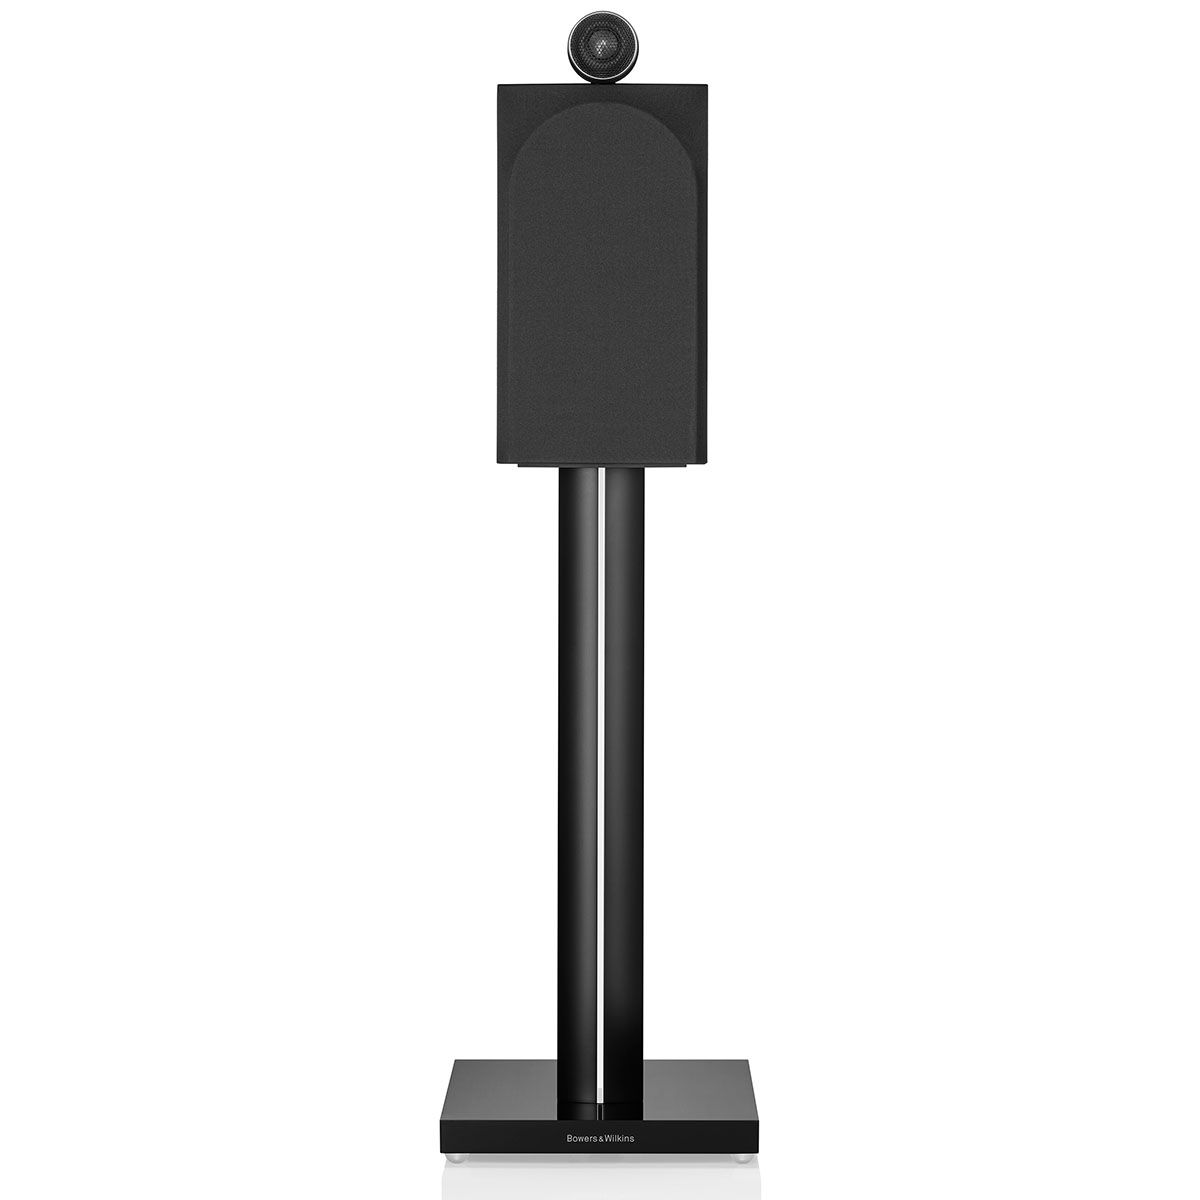 Bowers & Wilkins 705 S3 2-Way Stand Mount Bookshelf Loudspeakers - on stand with grille